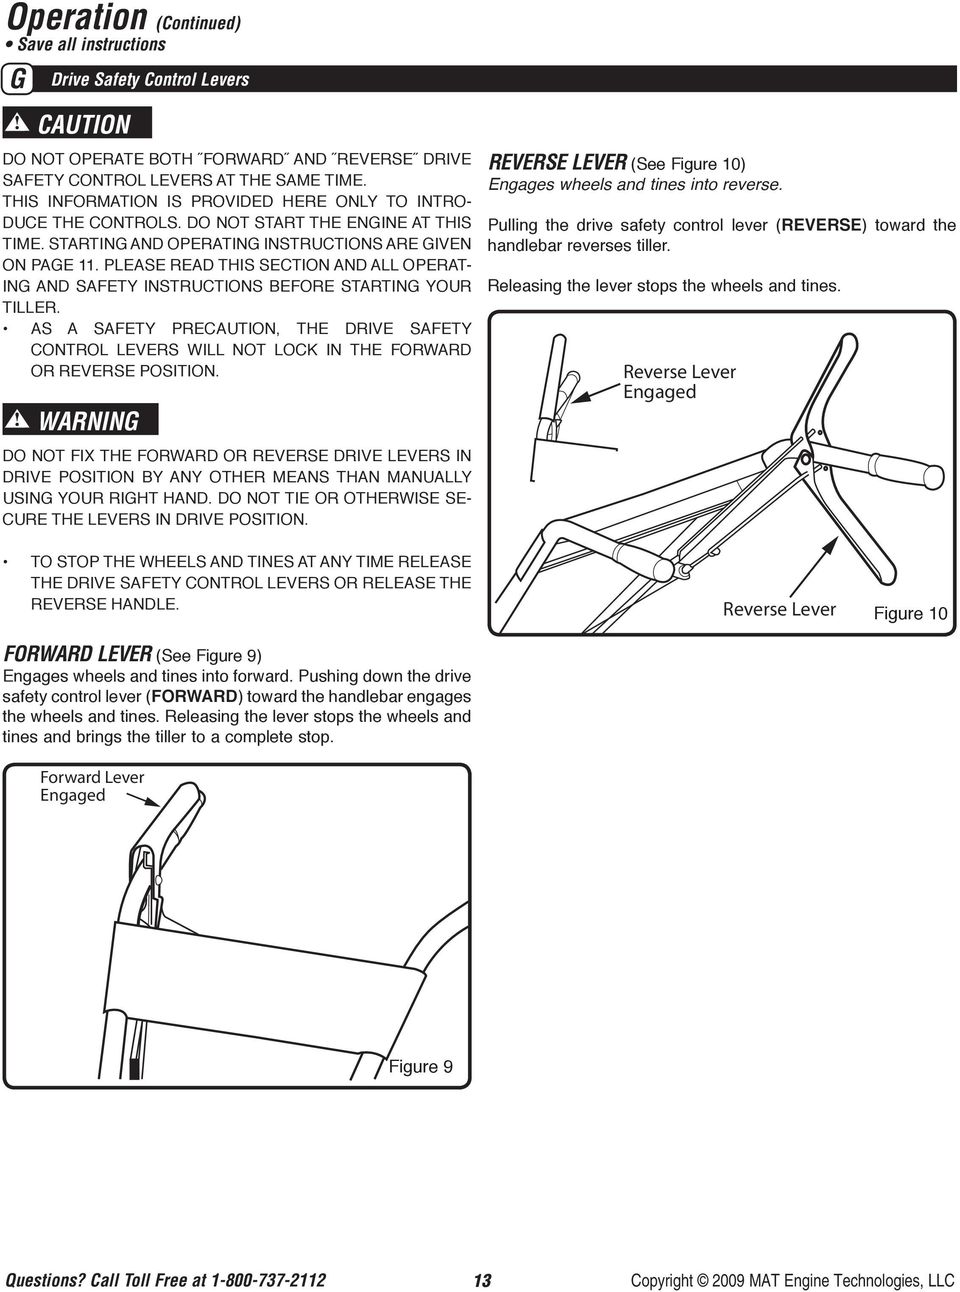 Please read this section and all operating and safety instructions before starting your tiller.